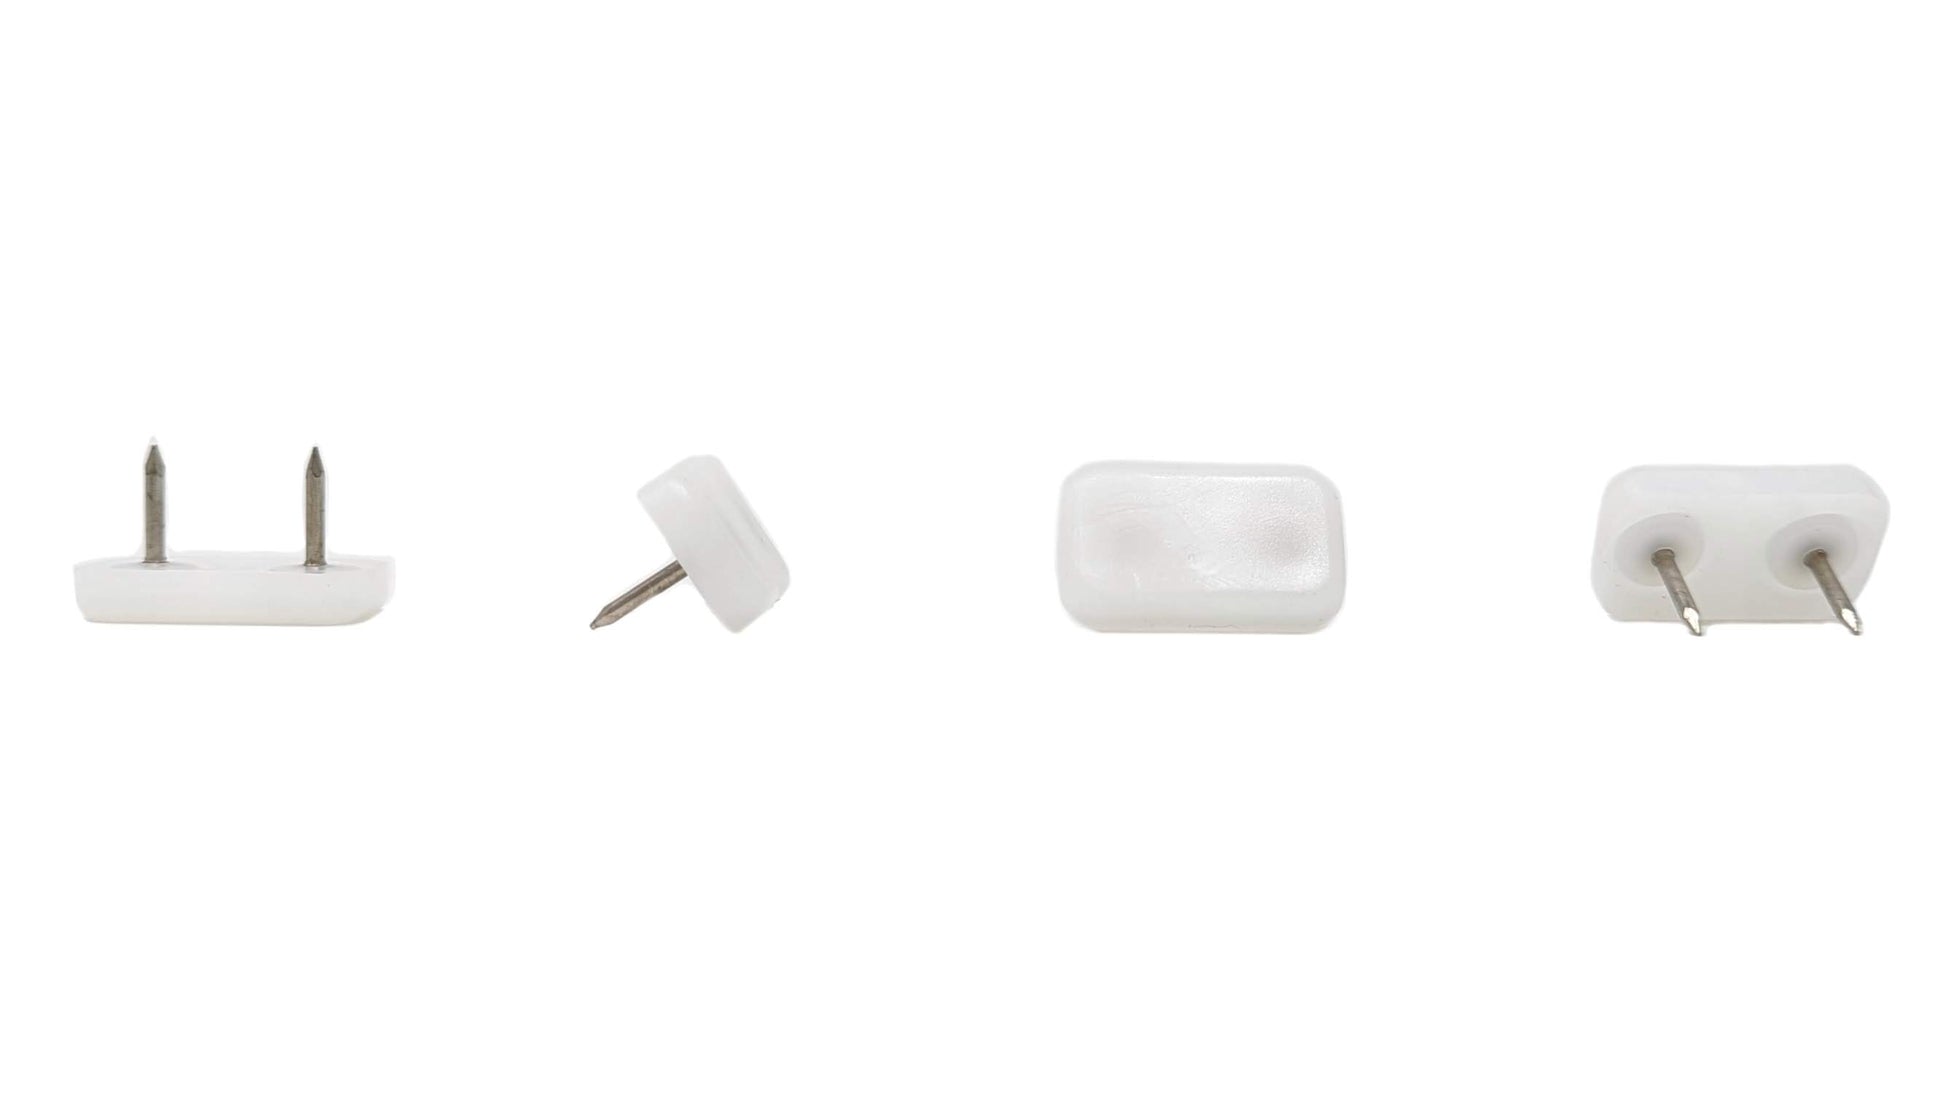 30x18mm Nail in Plastic Furniture Glides Available in Brown, White & Black | Made in Germany | Keay Vital Parts - Keay Vital Parts